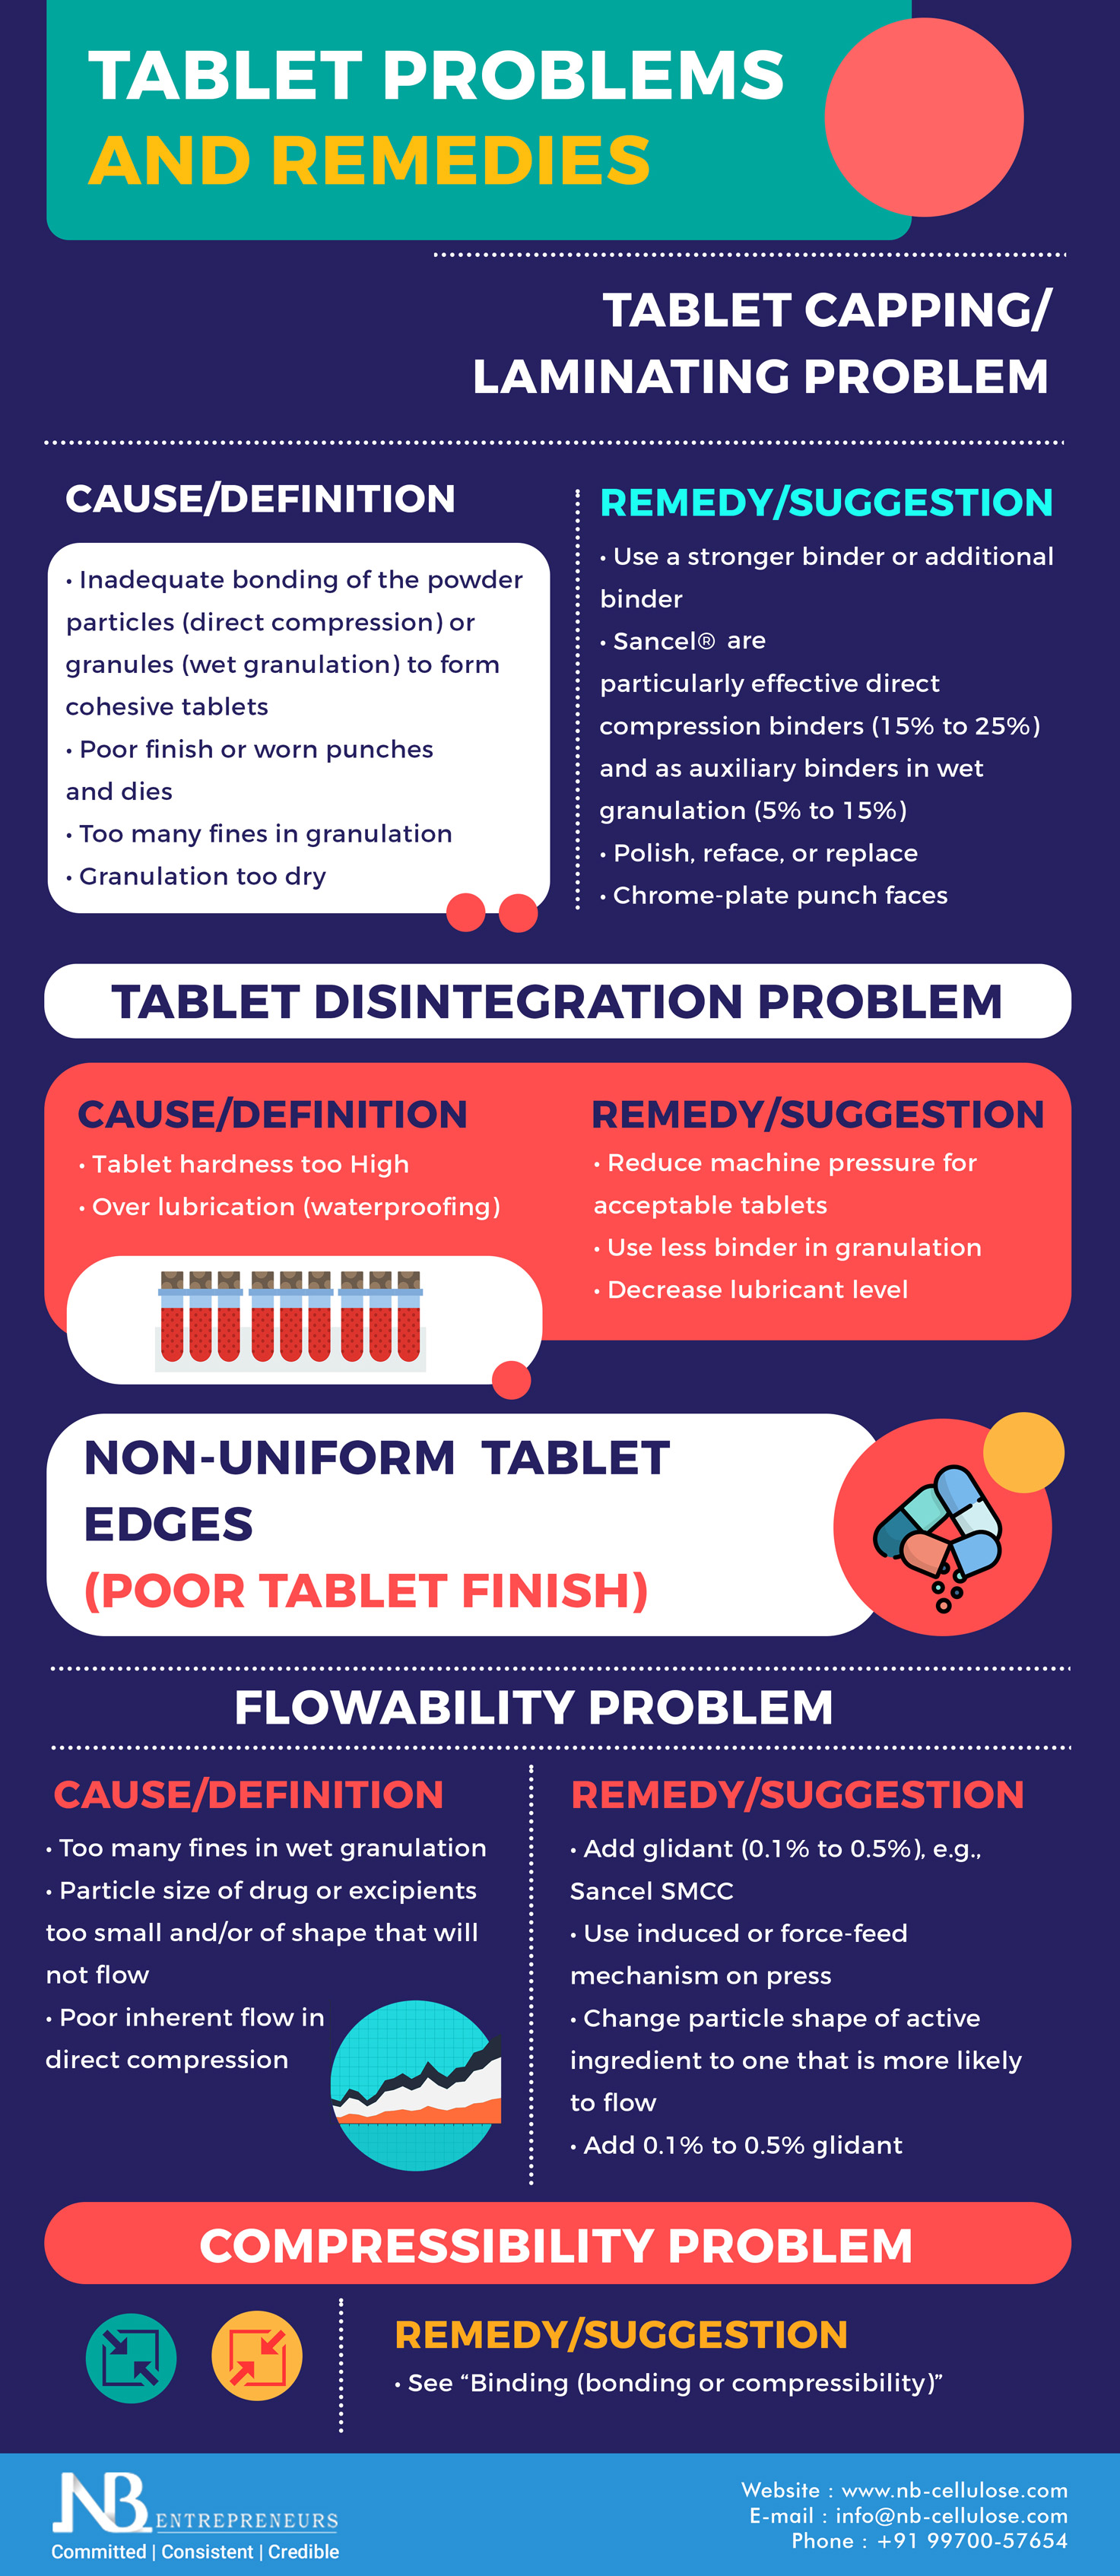 Here, we will talk about the problems, causes & remedies associated with tablets manufacturing.